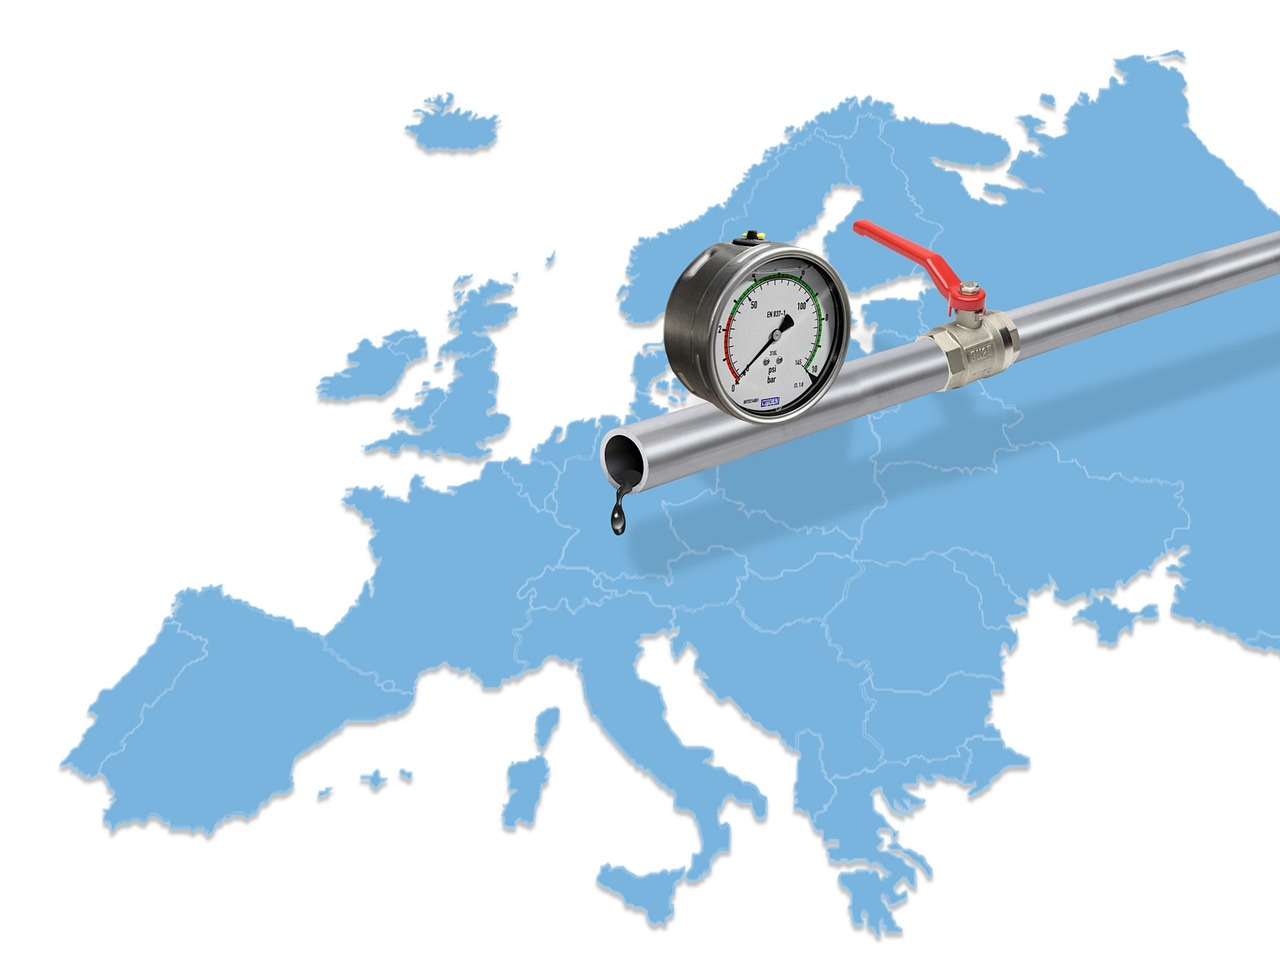 Russia's Fuel Export Ban: Impact And Implications